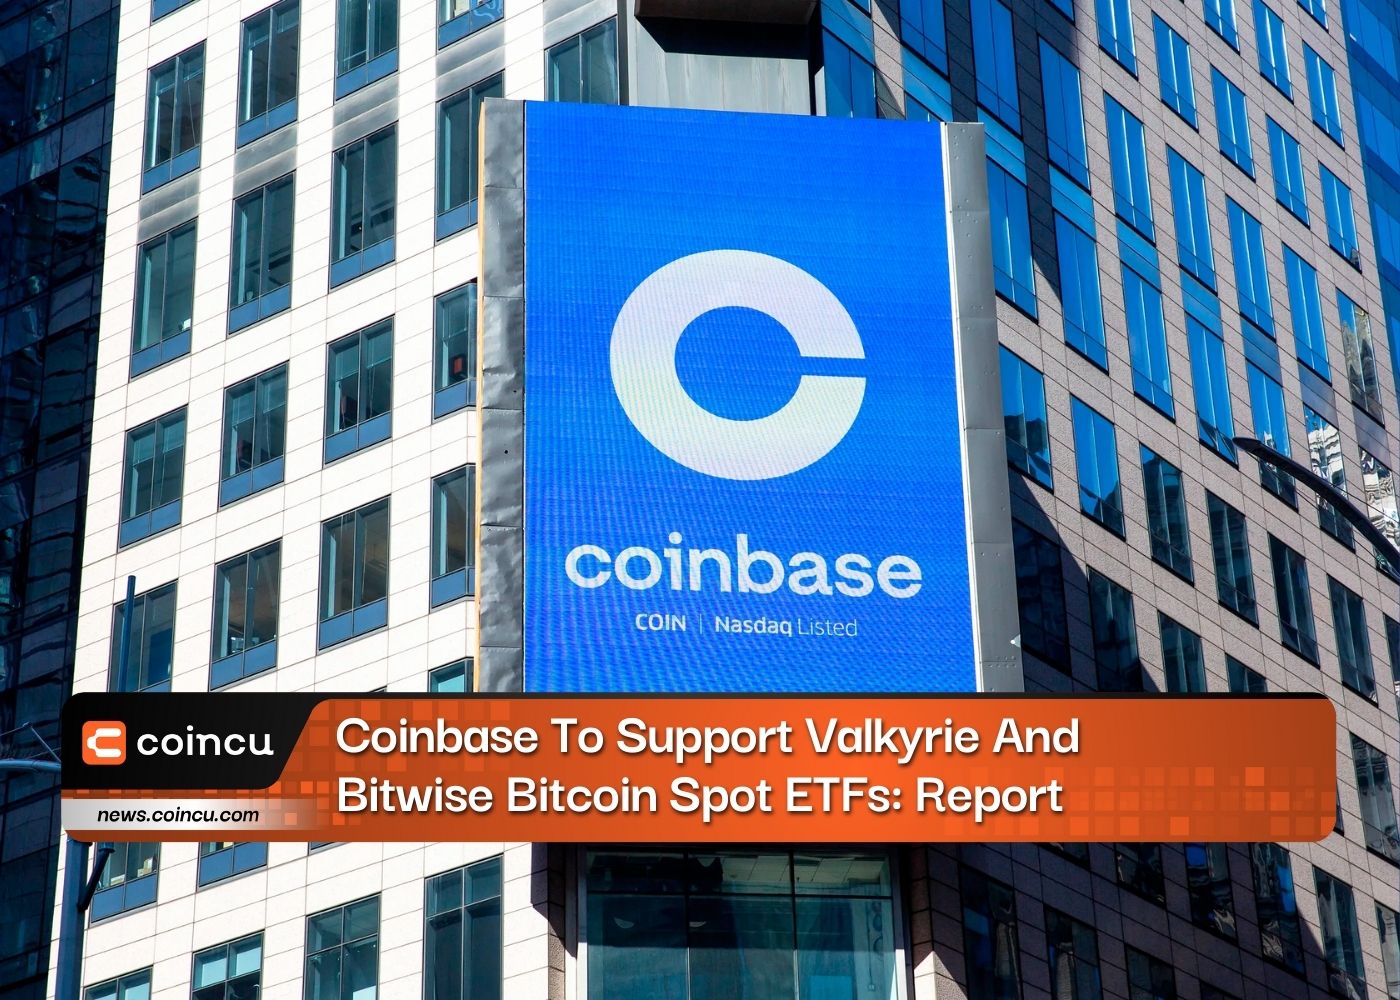 Coinbase To Support Valkyrie And Bitwise Bitcoin Spot ETFs: Report